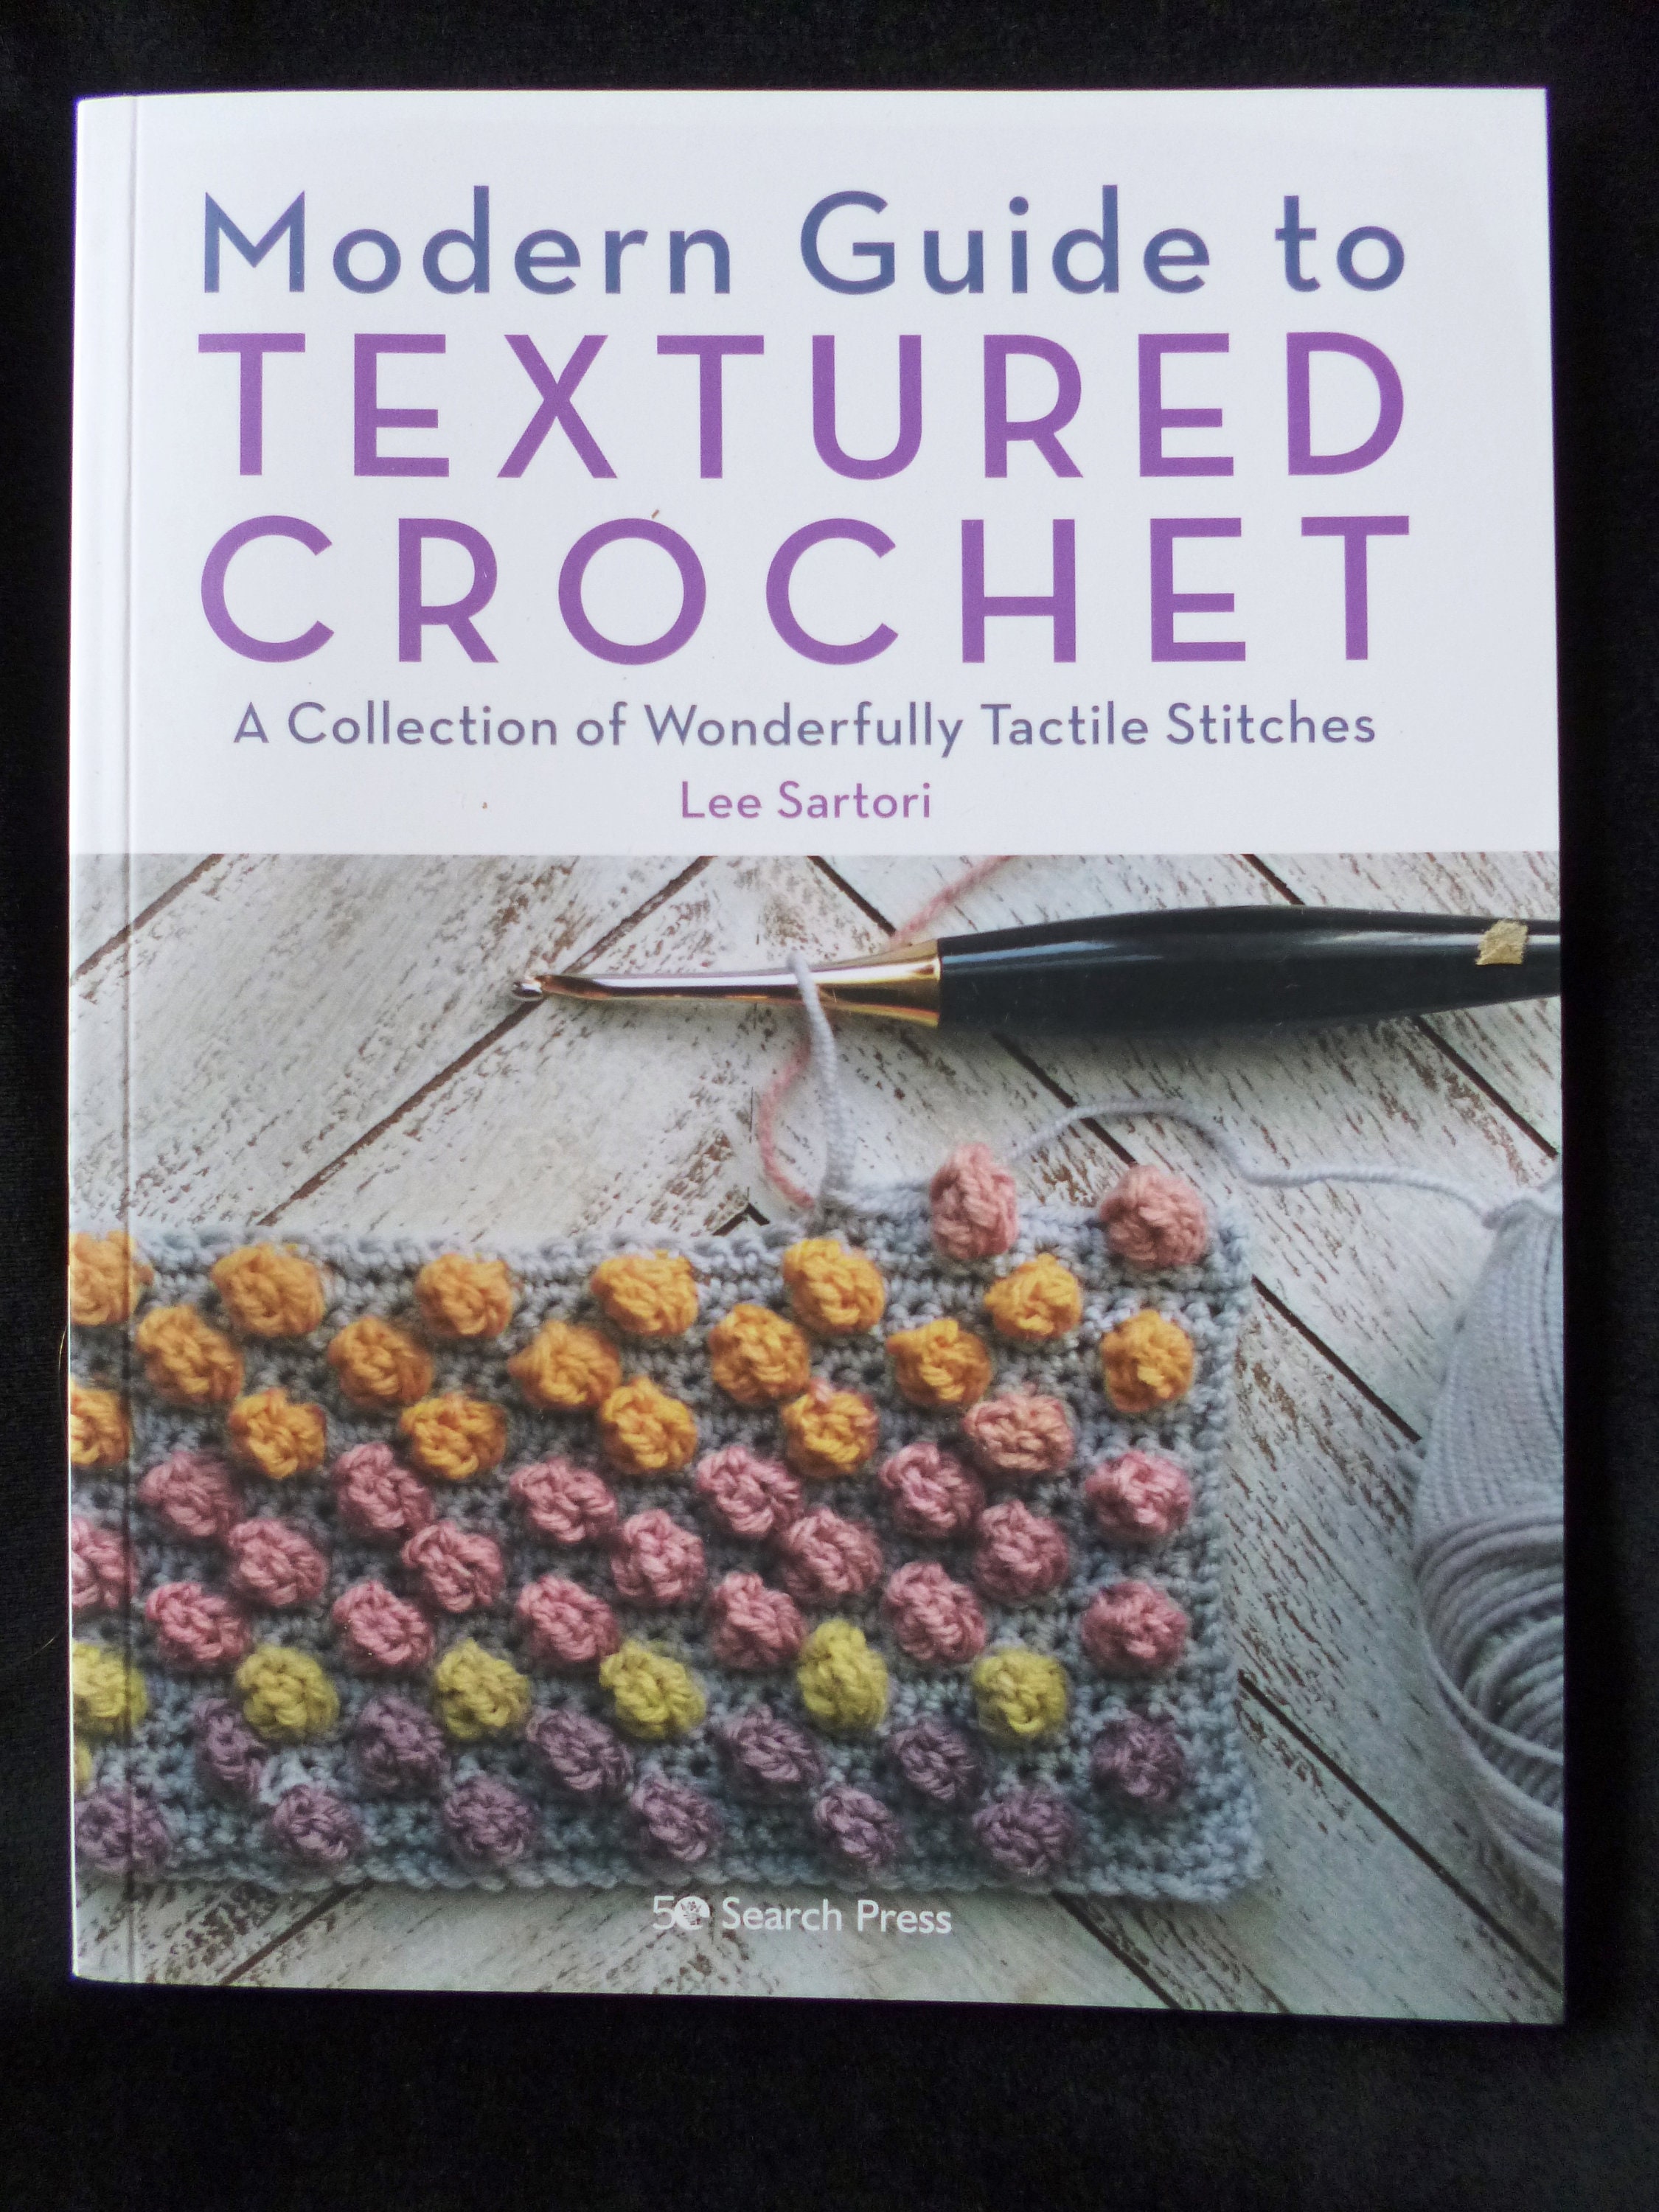 The Hooktionary by Brenda K.B Anderson Crochet Book Review